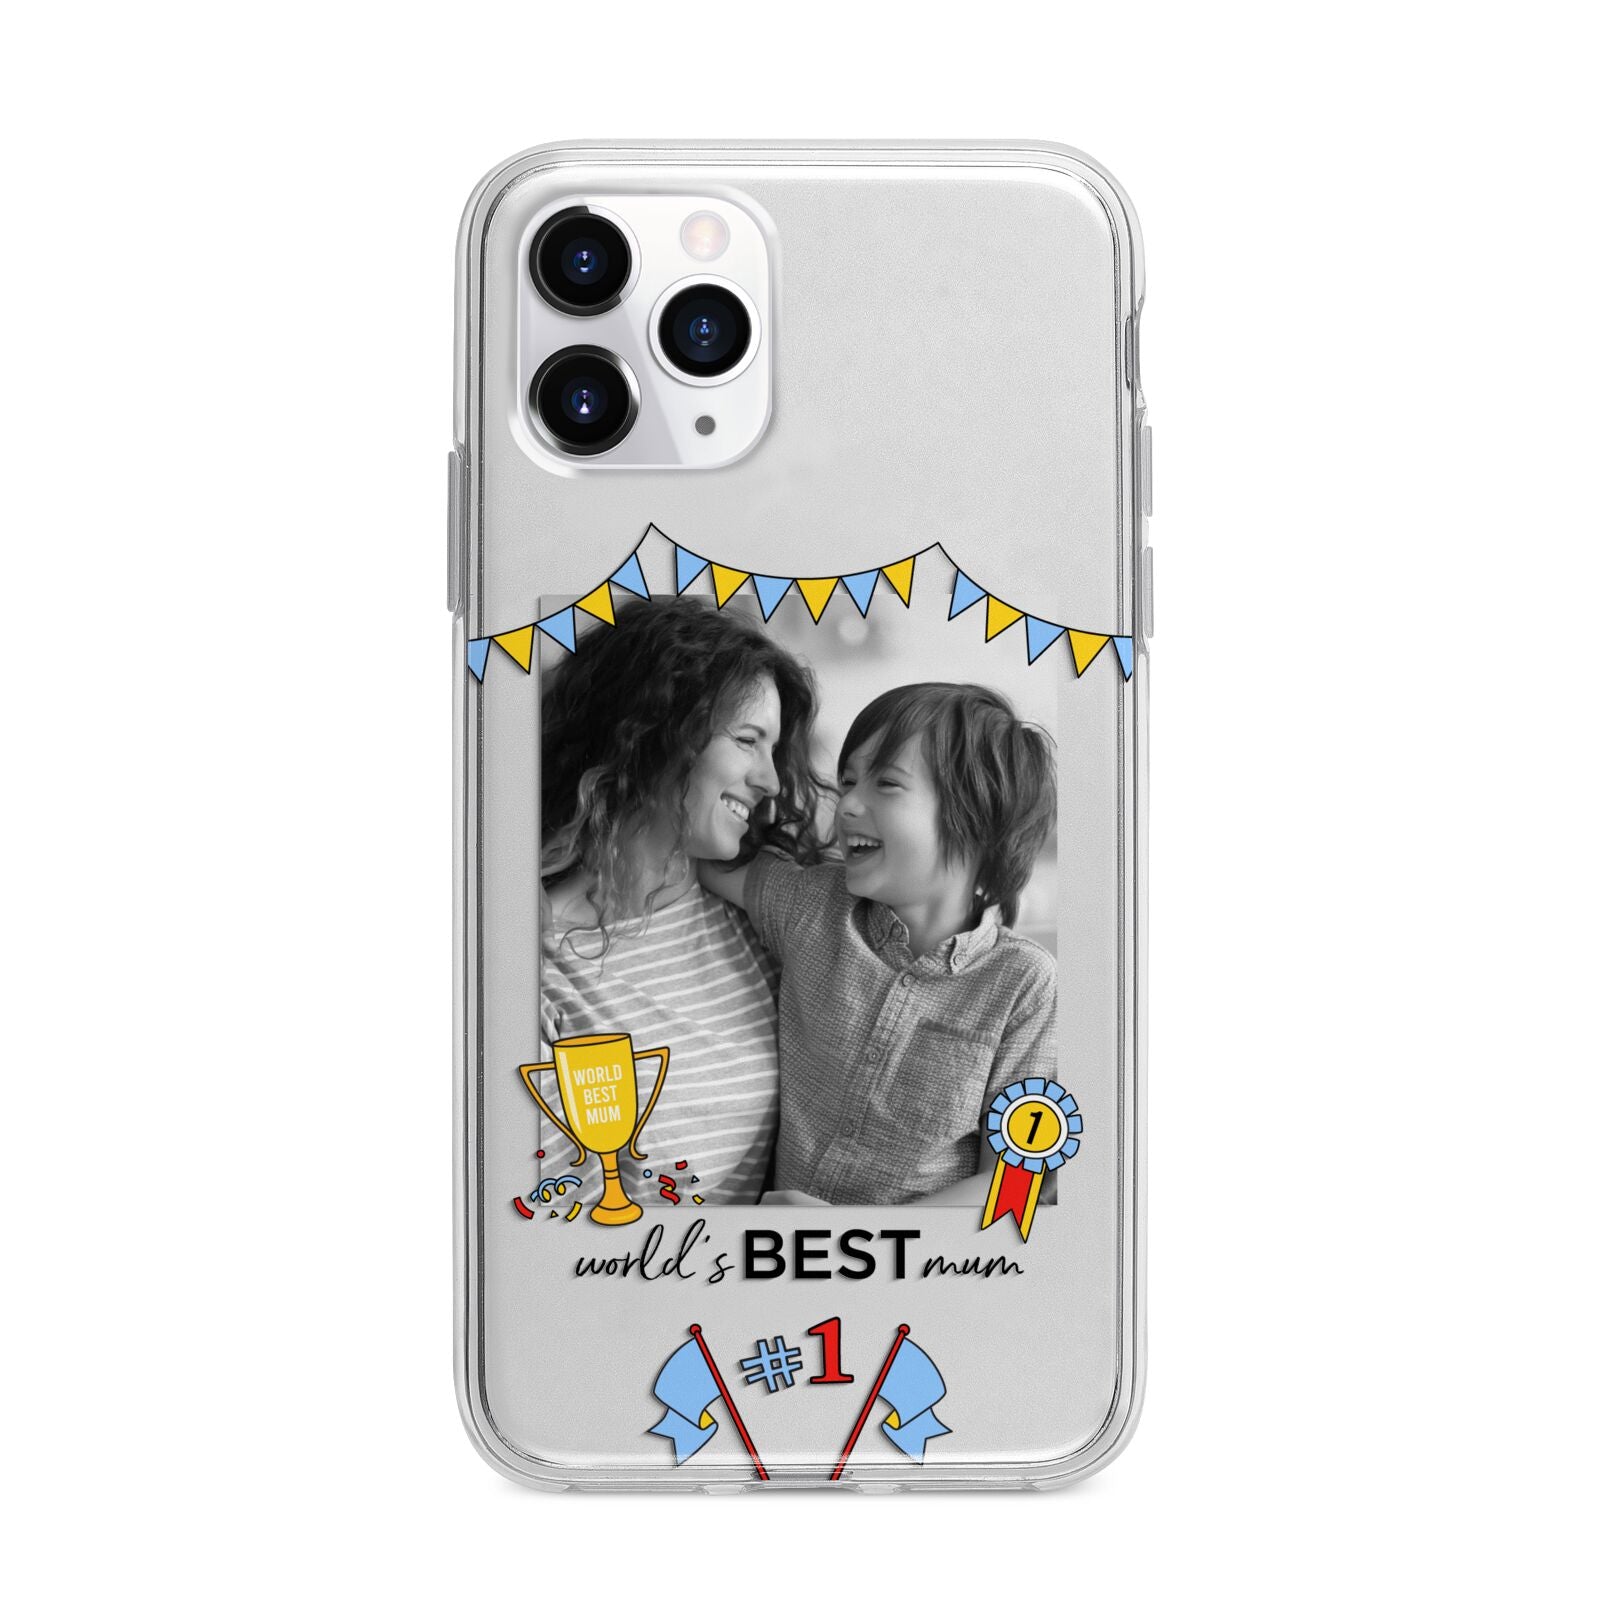 Worlds Best Mum Apple iPhone 11 Pro Max in Silver with Bumper Case